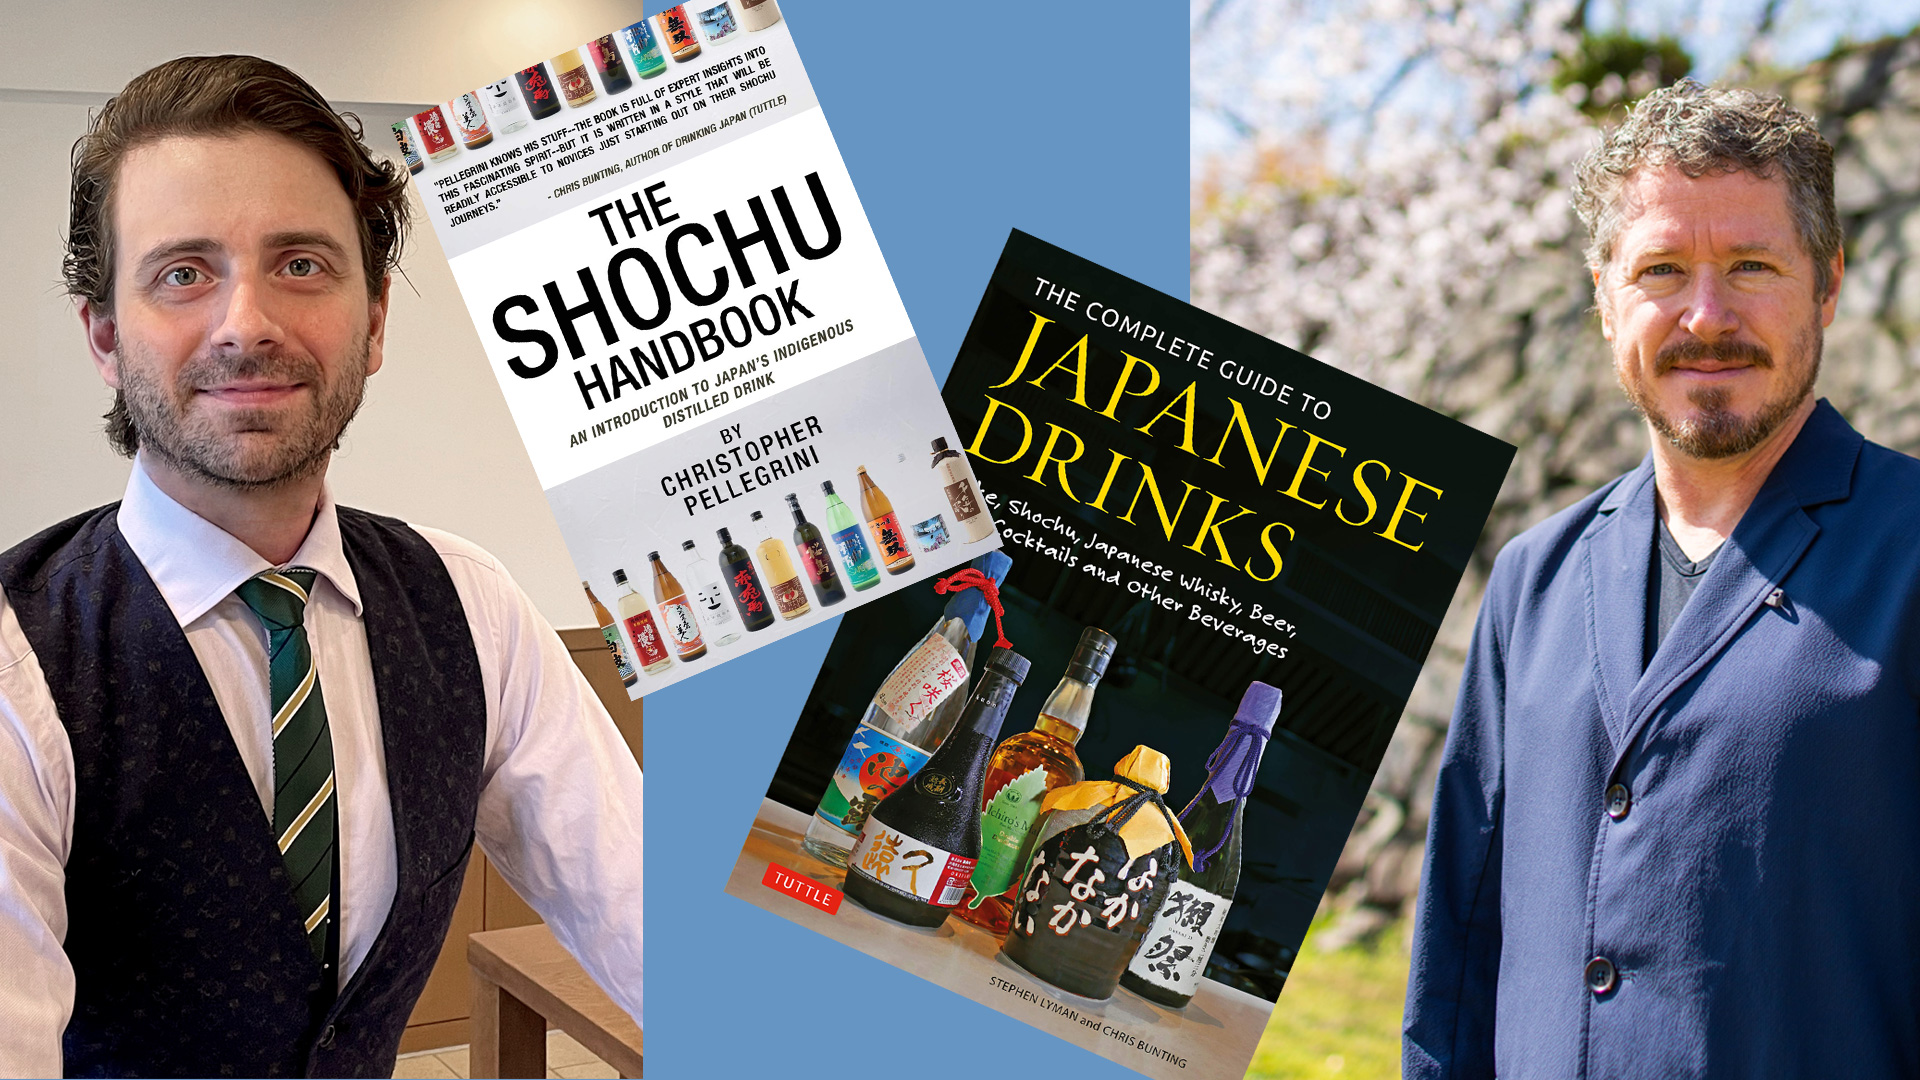 The NOLADrinks Show – Shochu – 2021Ep12 – Shochu authors and experts Christopher Pellegrini and Stephen Lyman with their terrific publications, The Shochu Handbook and The Complete Guide to Japanese Drinks.